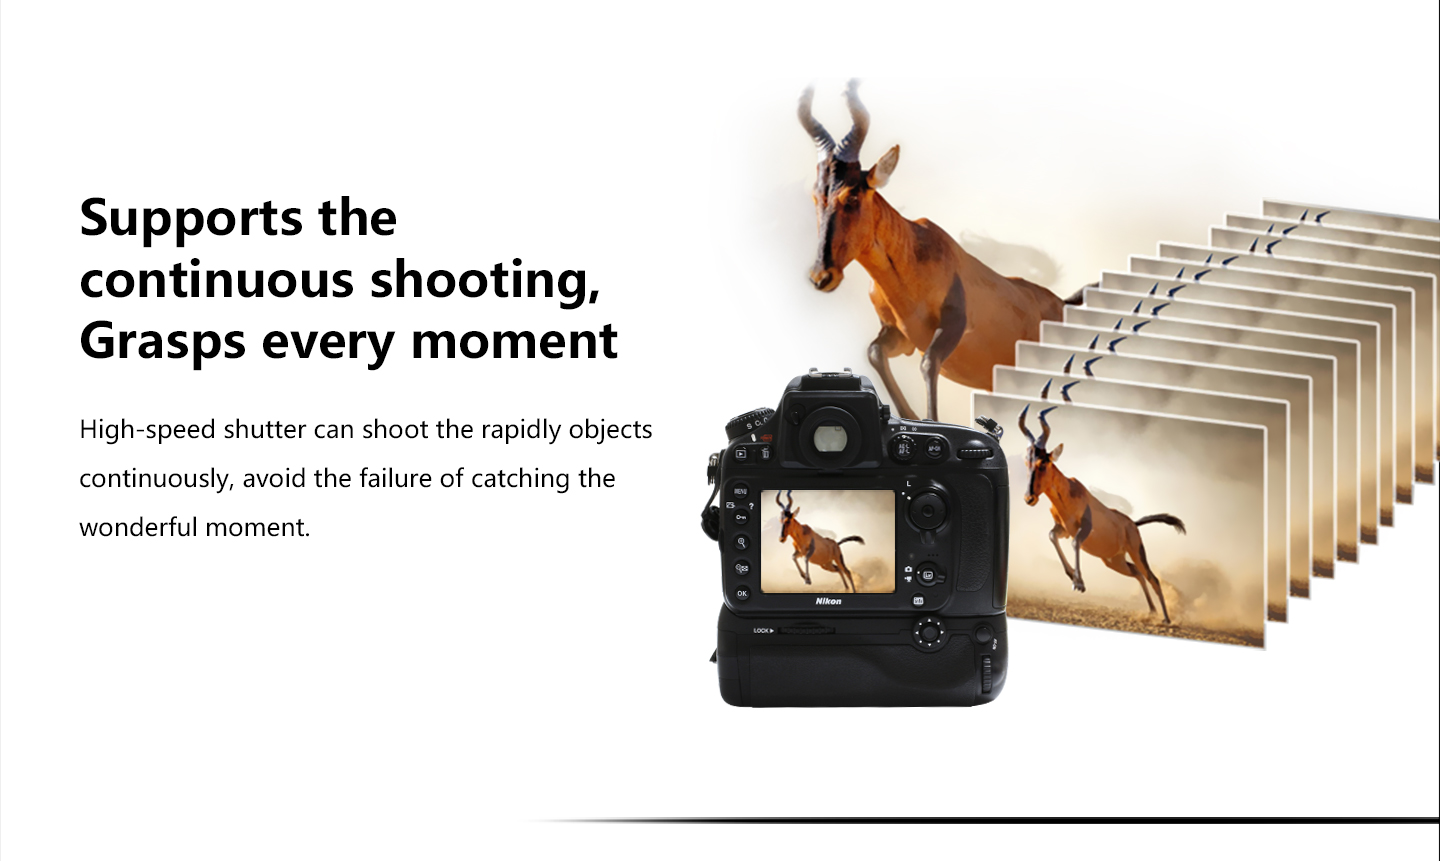 Supports the continuous shooting, Grasps every moment